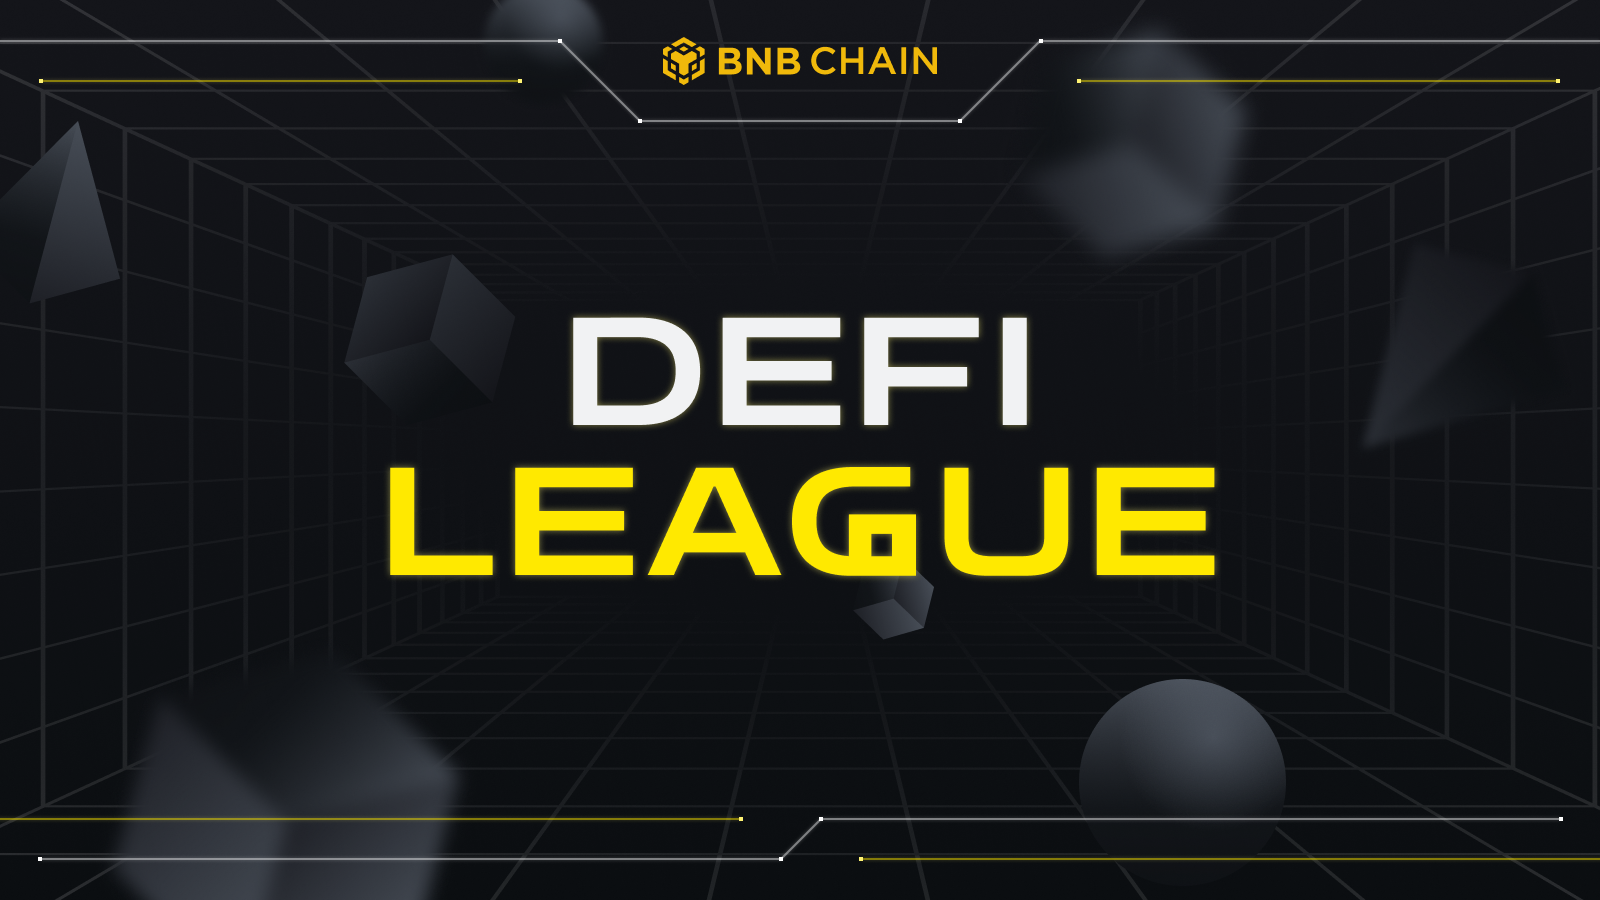 The DeFi League Welcomes New Additions